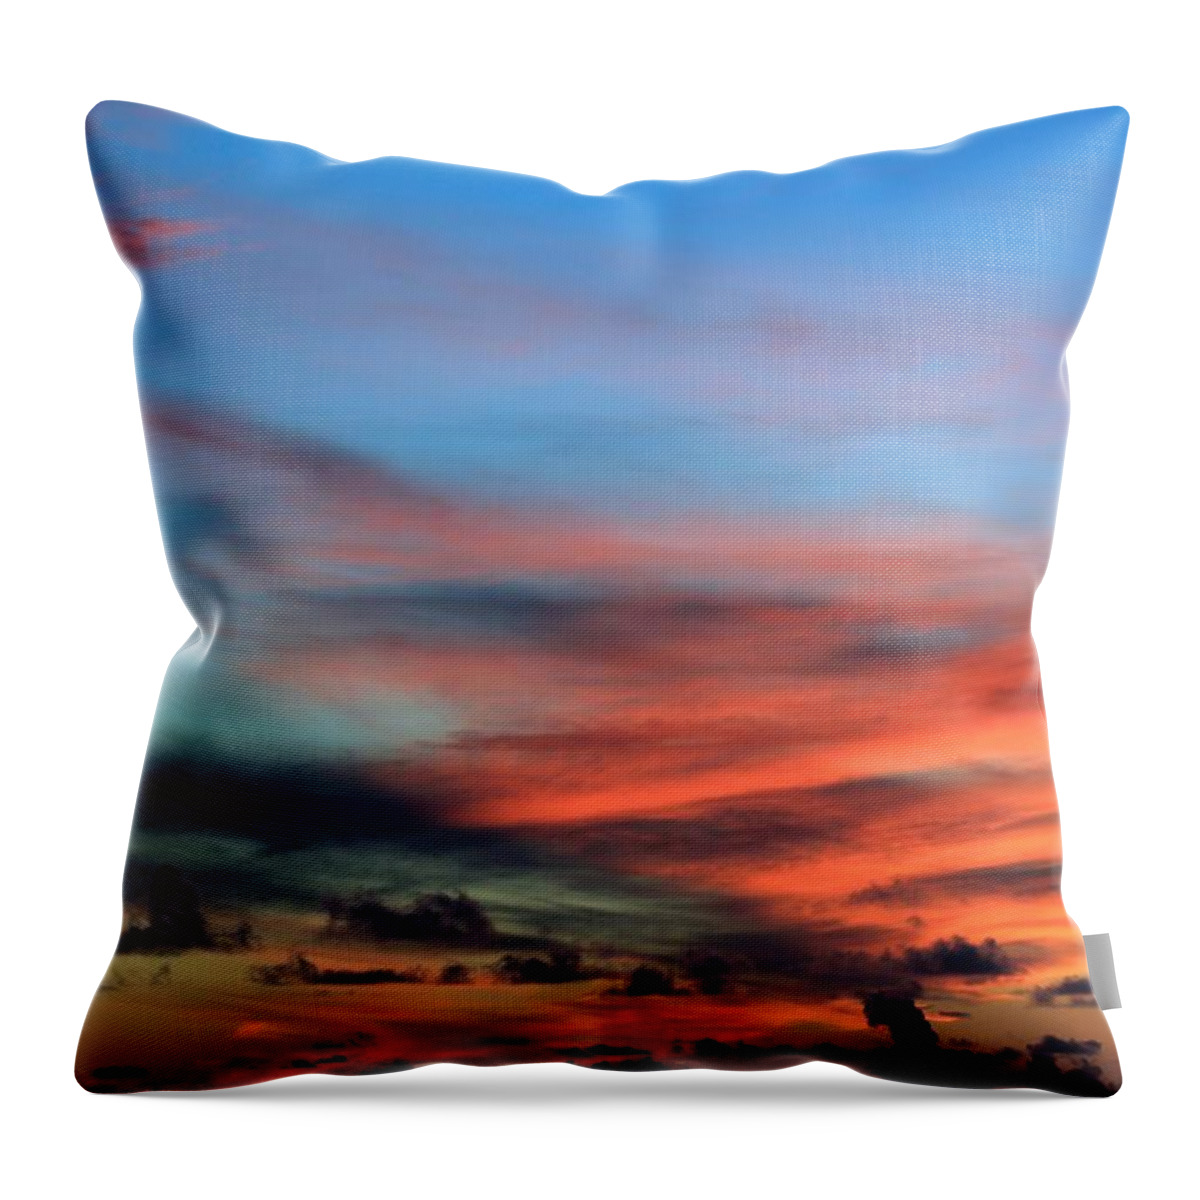 Sunset Throw Pillow featuring the photograph Painted Sky by Kimberly Reeves